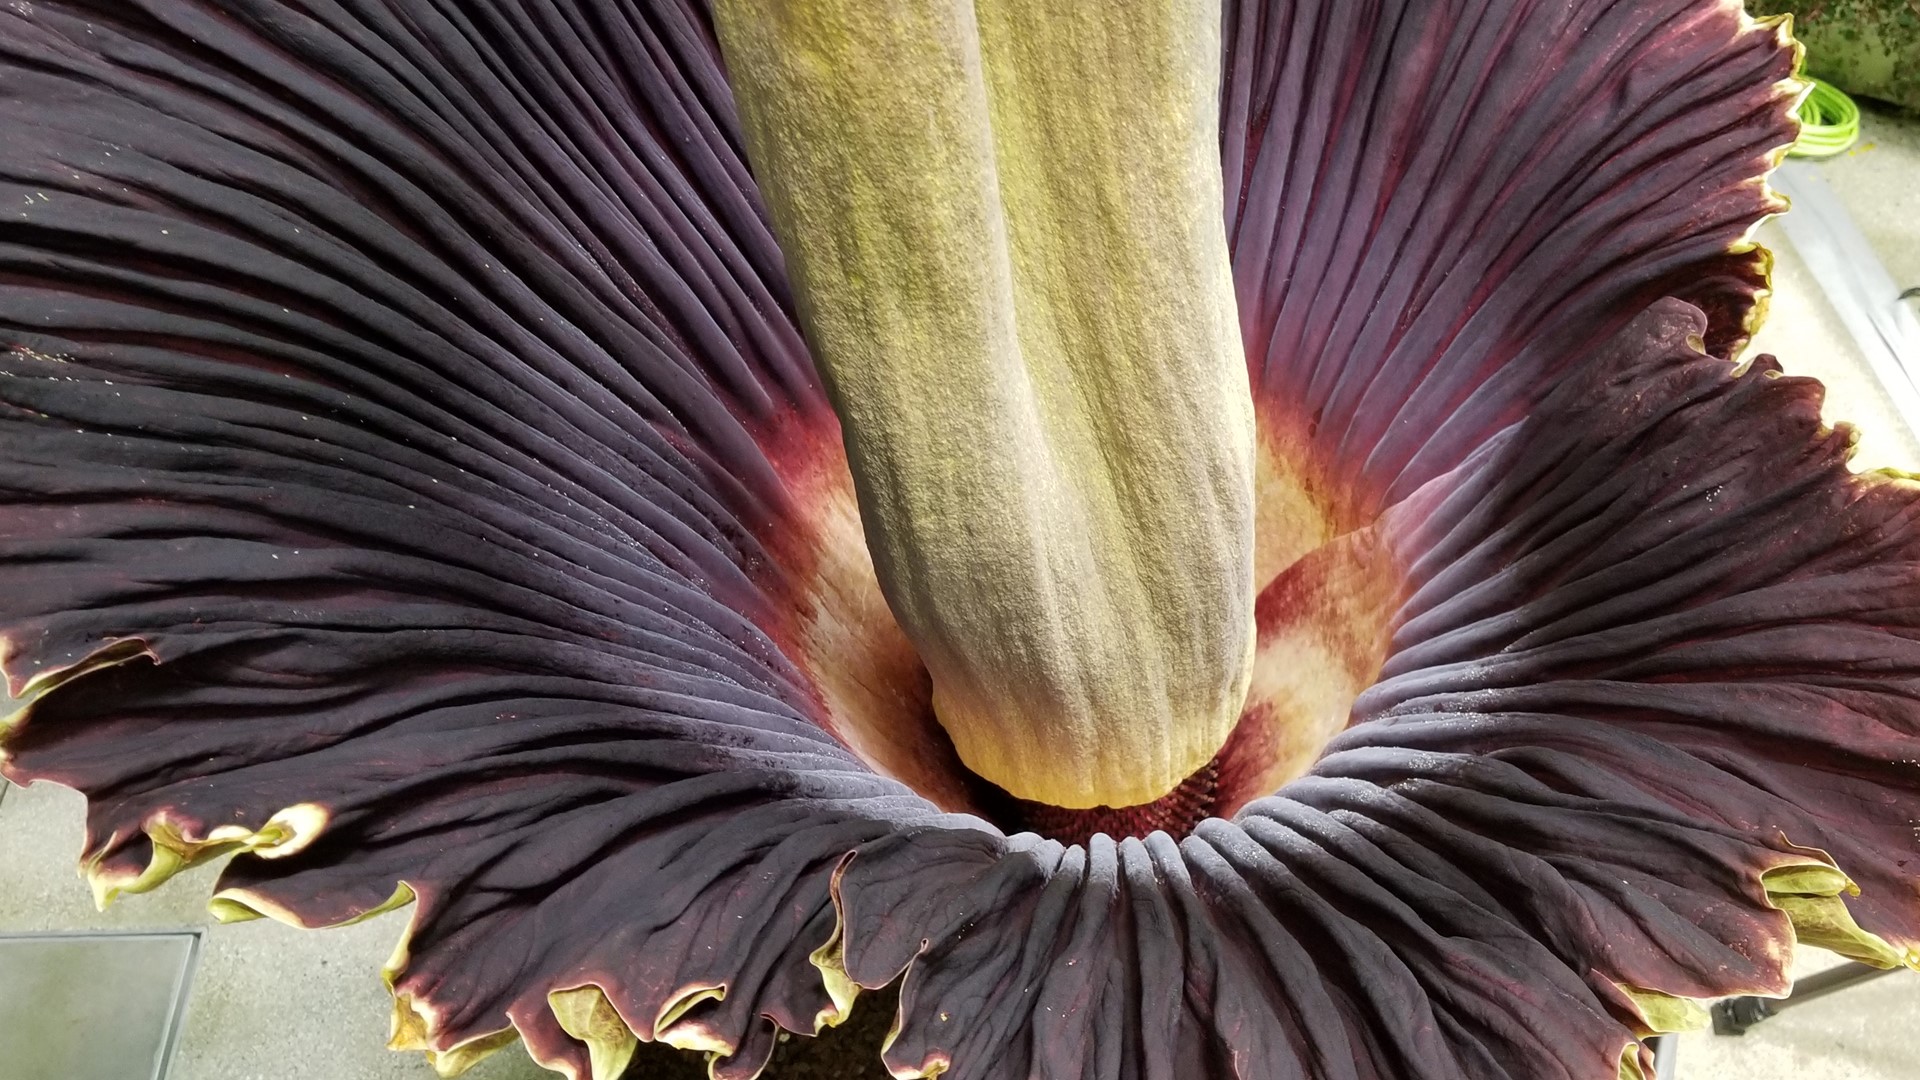 Corpse flower blooming inside Seattle's Amazon Spheres